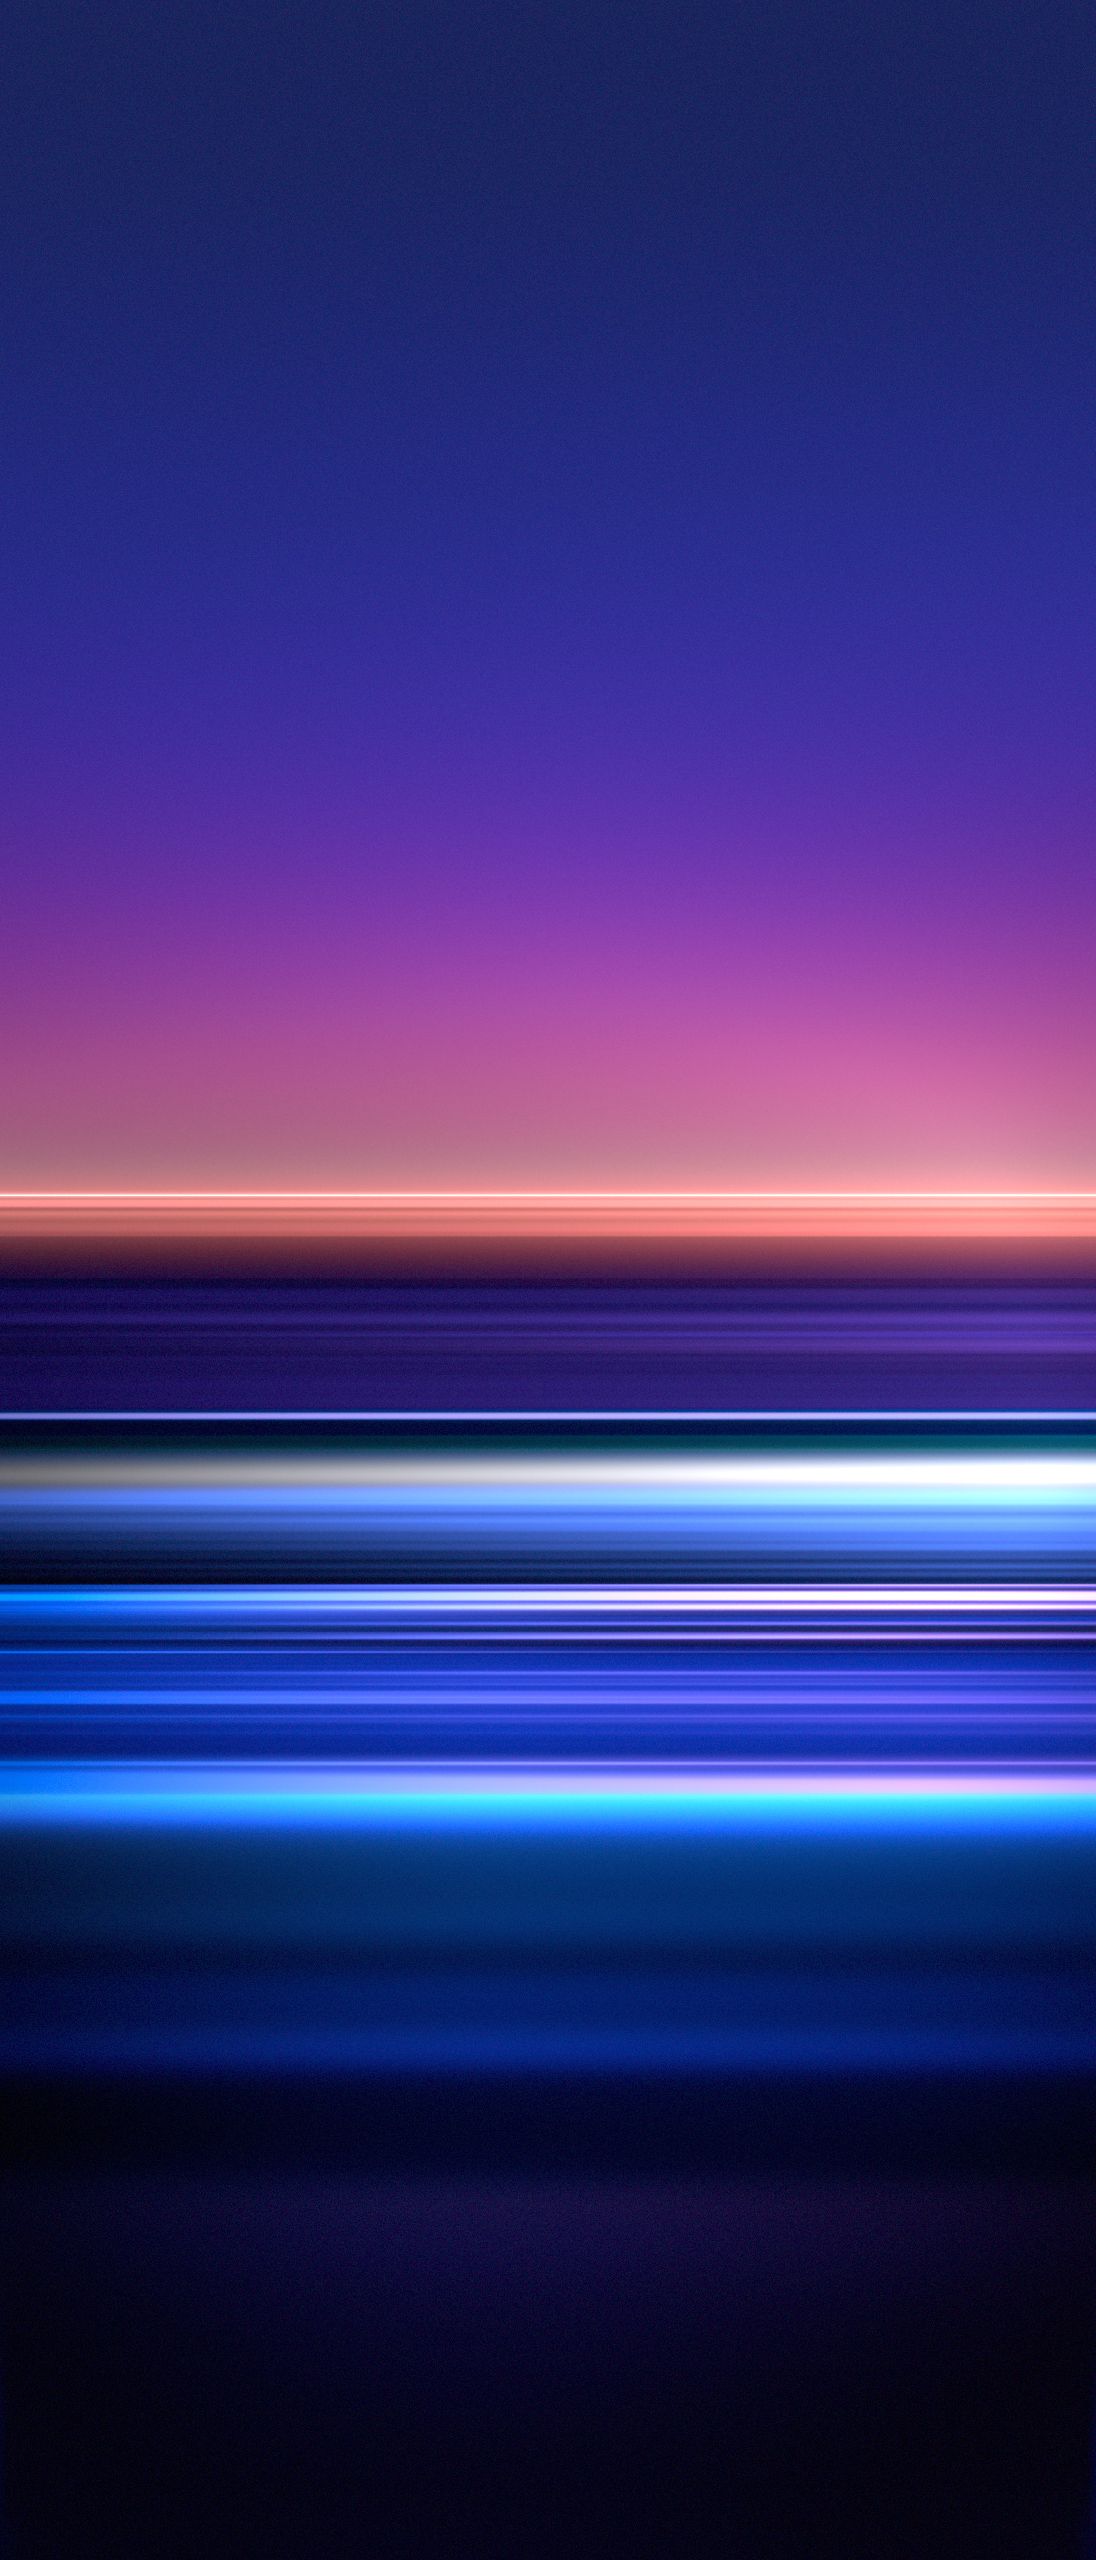 Free Download Sony Xperia 1 Stock Wallpaper 01 1096x2560 1096x2560 For Your Desktop Mobile Tablet Explore 28 Sony Xperia 1 Wallpapers Sony Xperia 1 Wallpapers Sony Xperia Wallpaper Sony Xperia Wallpapers